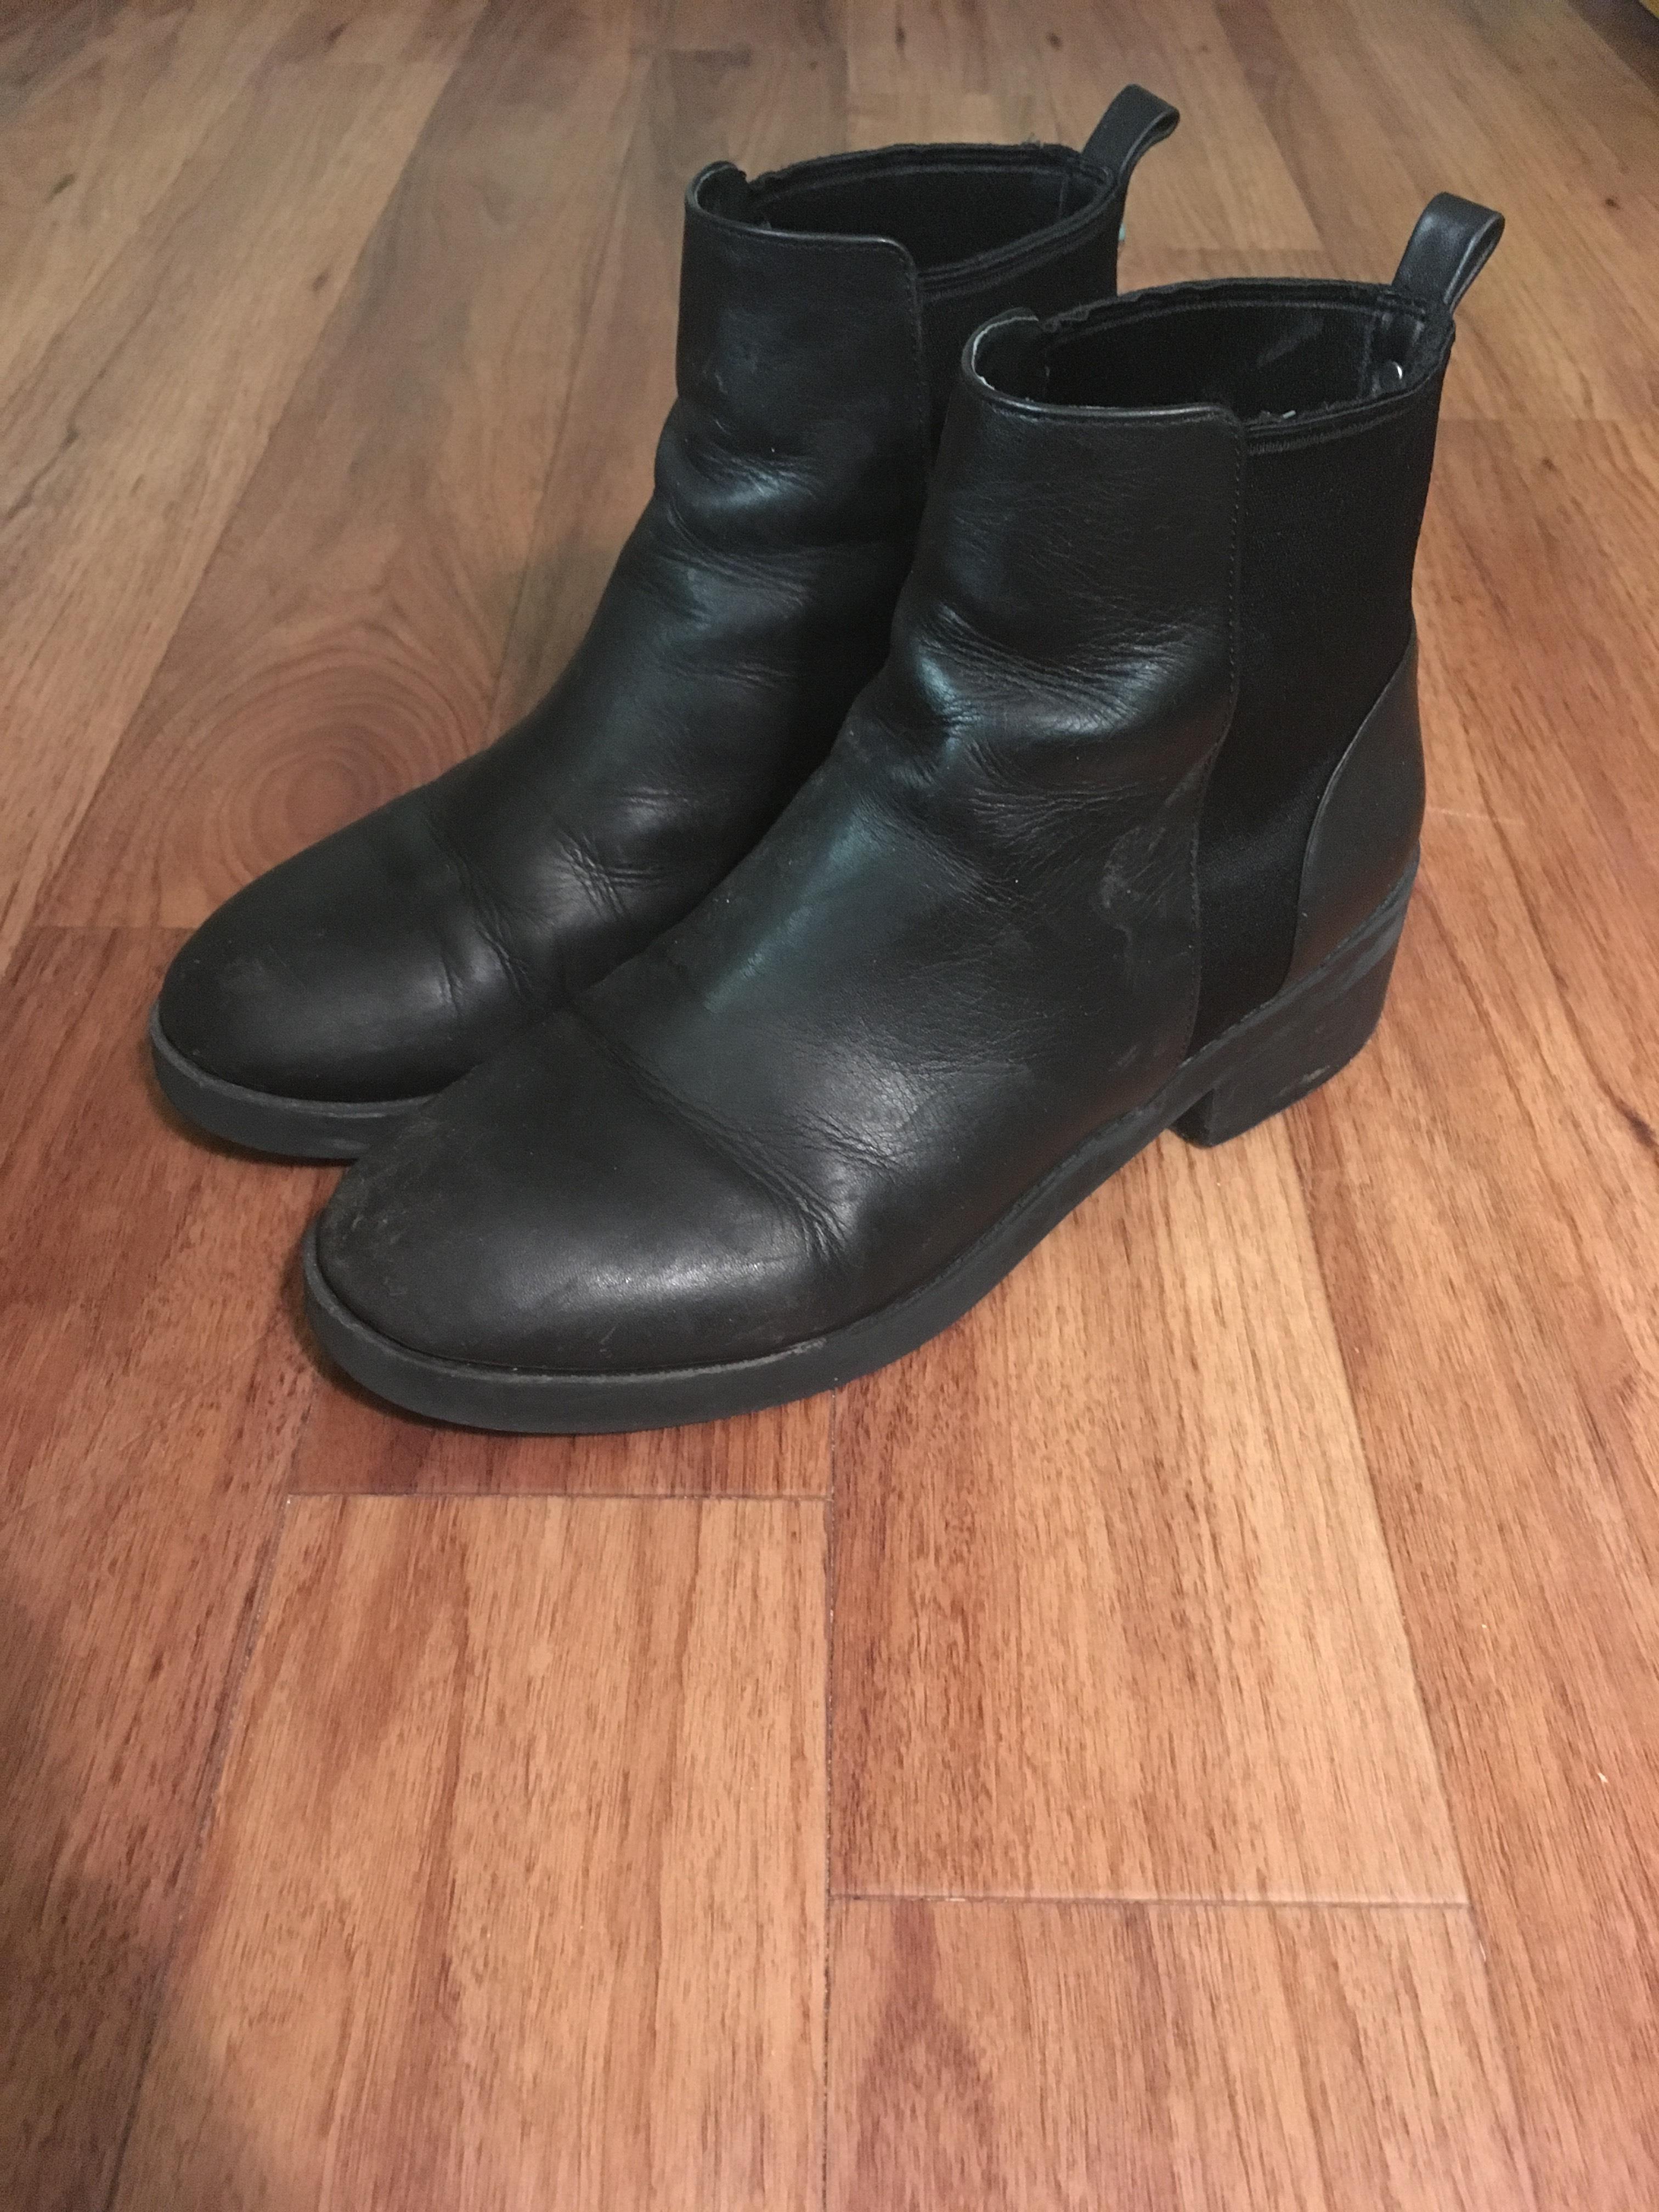 craigslist motorcycle boots